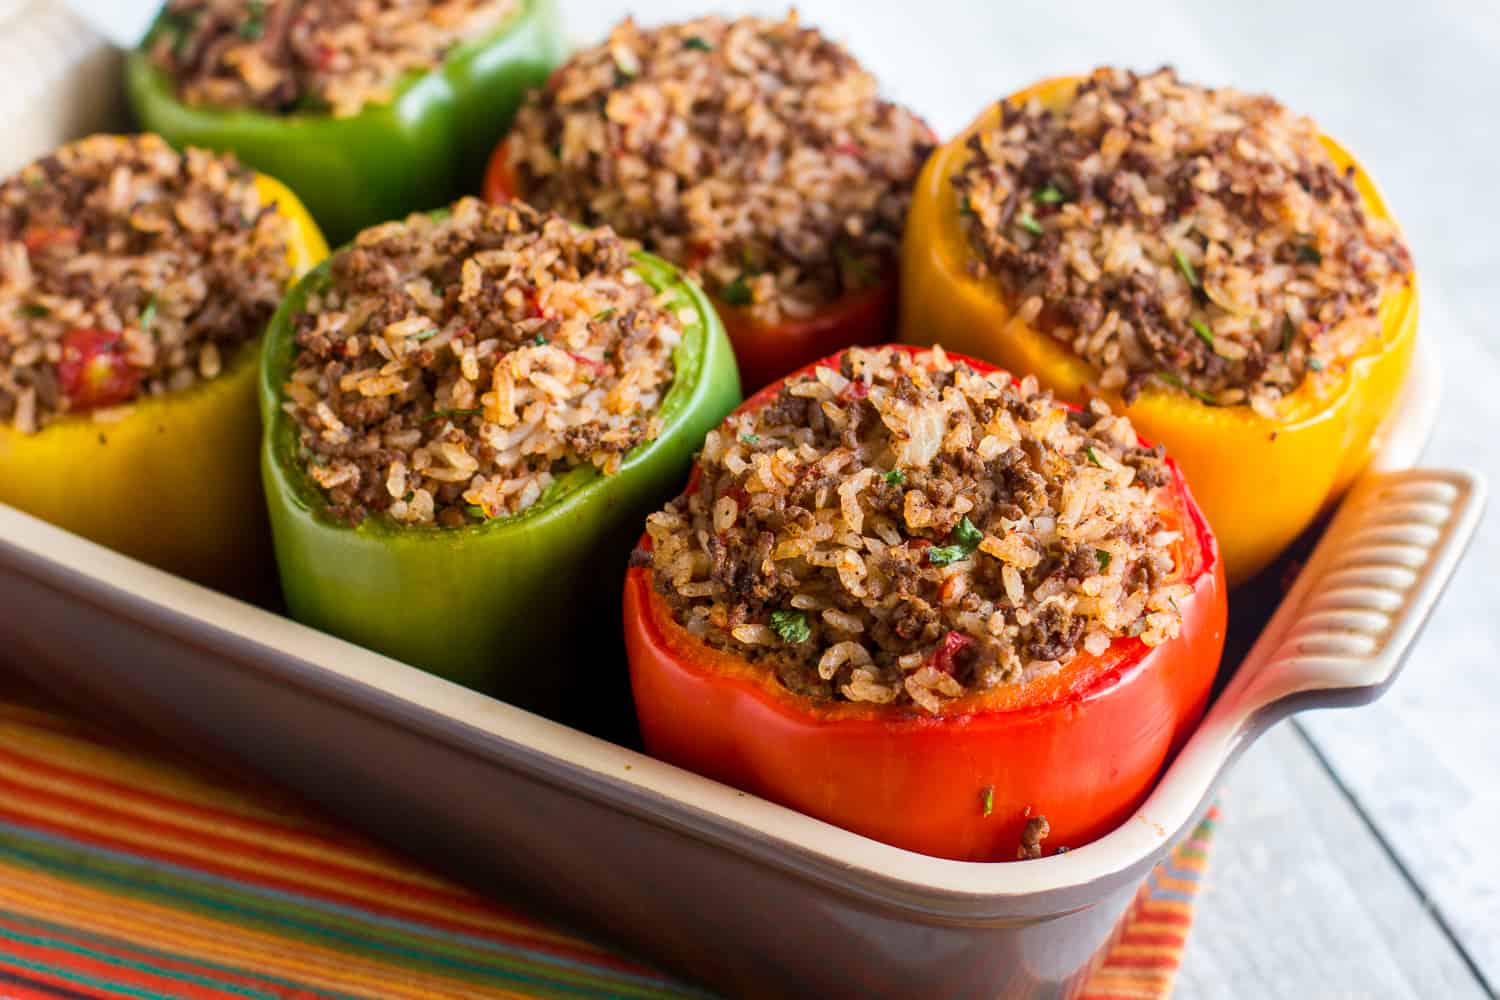 Stuffed Pepper Recipe With Ground Beef And Rice,Types Of Birch Trees In Wisconsin